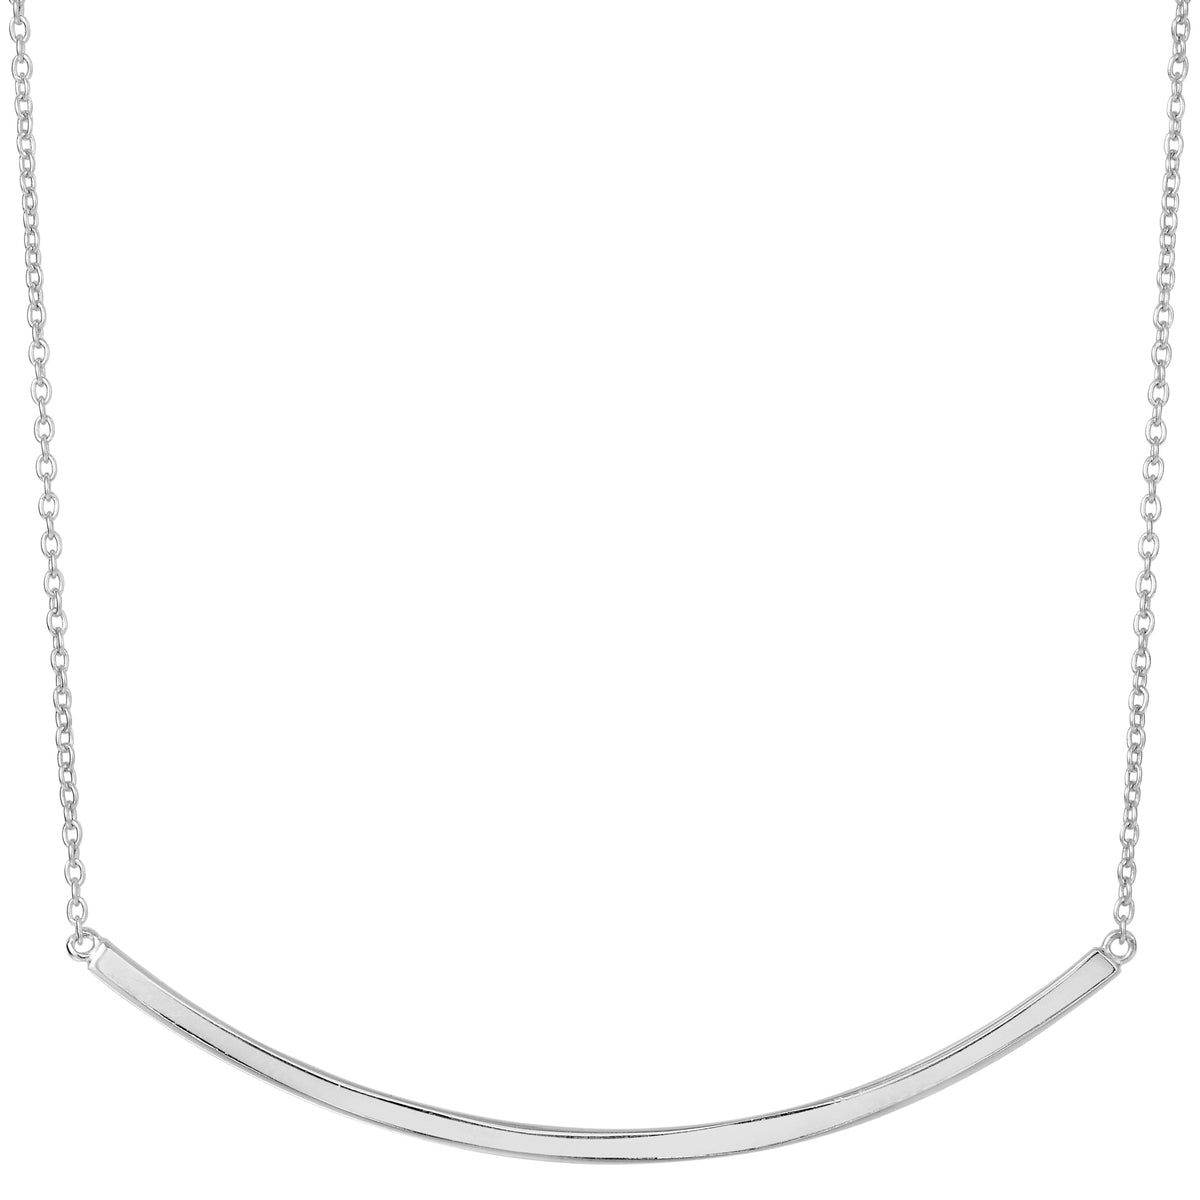 Sterling Silver Sideways Curve Bar Pendant Necklace, 18" fine designer jewelry for men and women